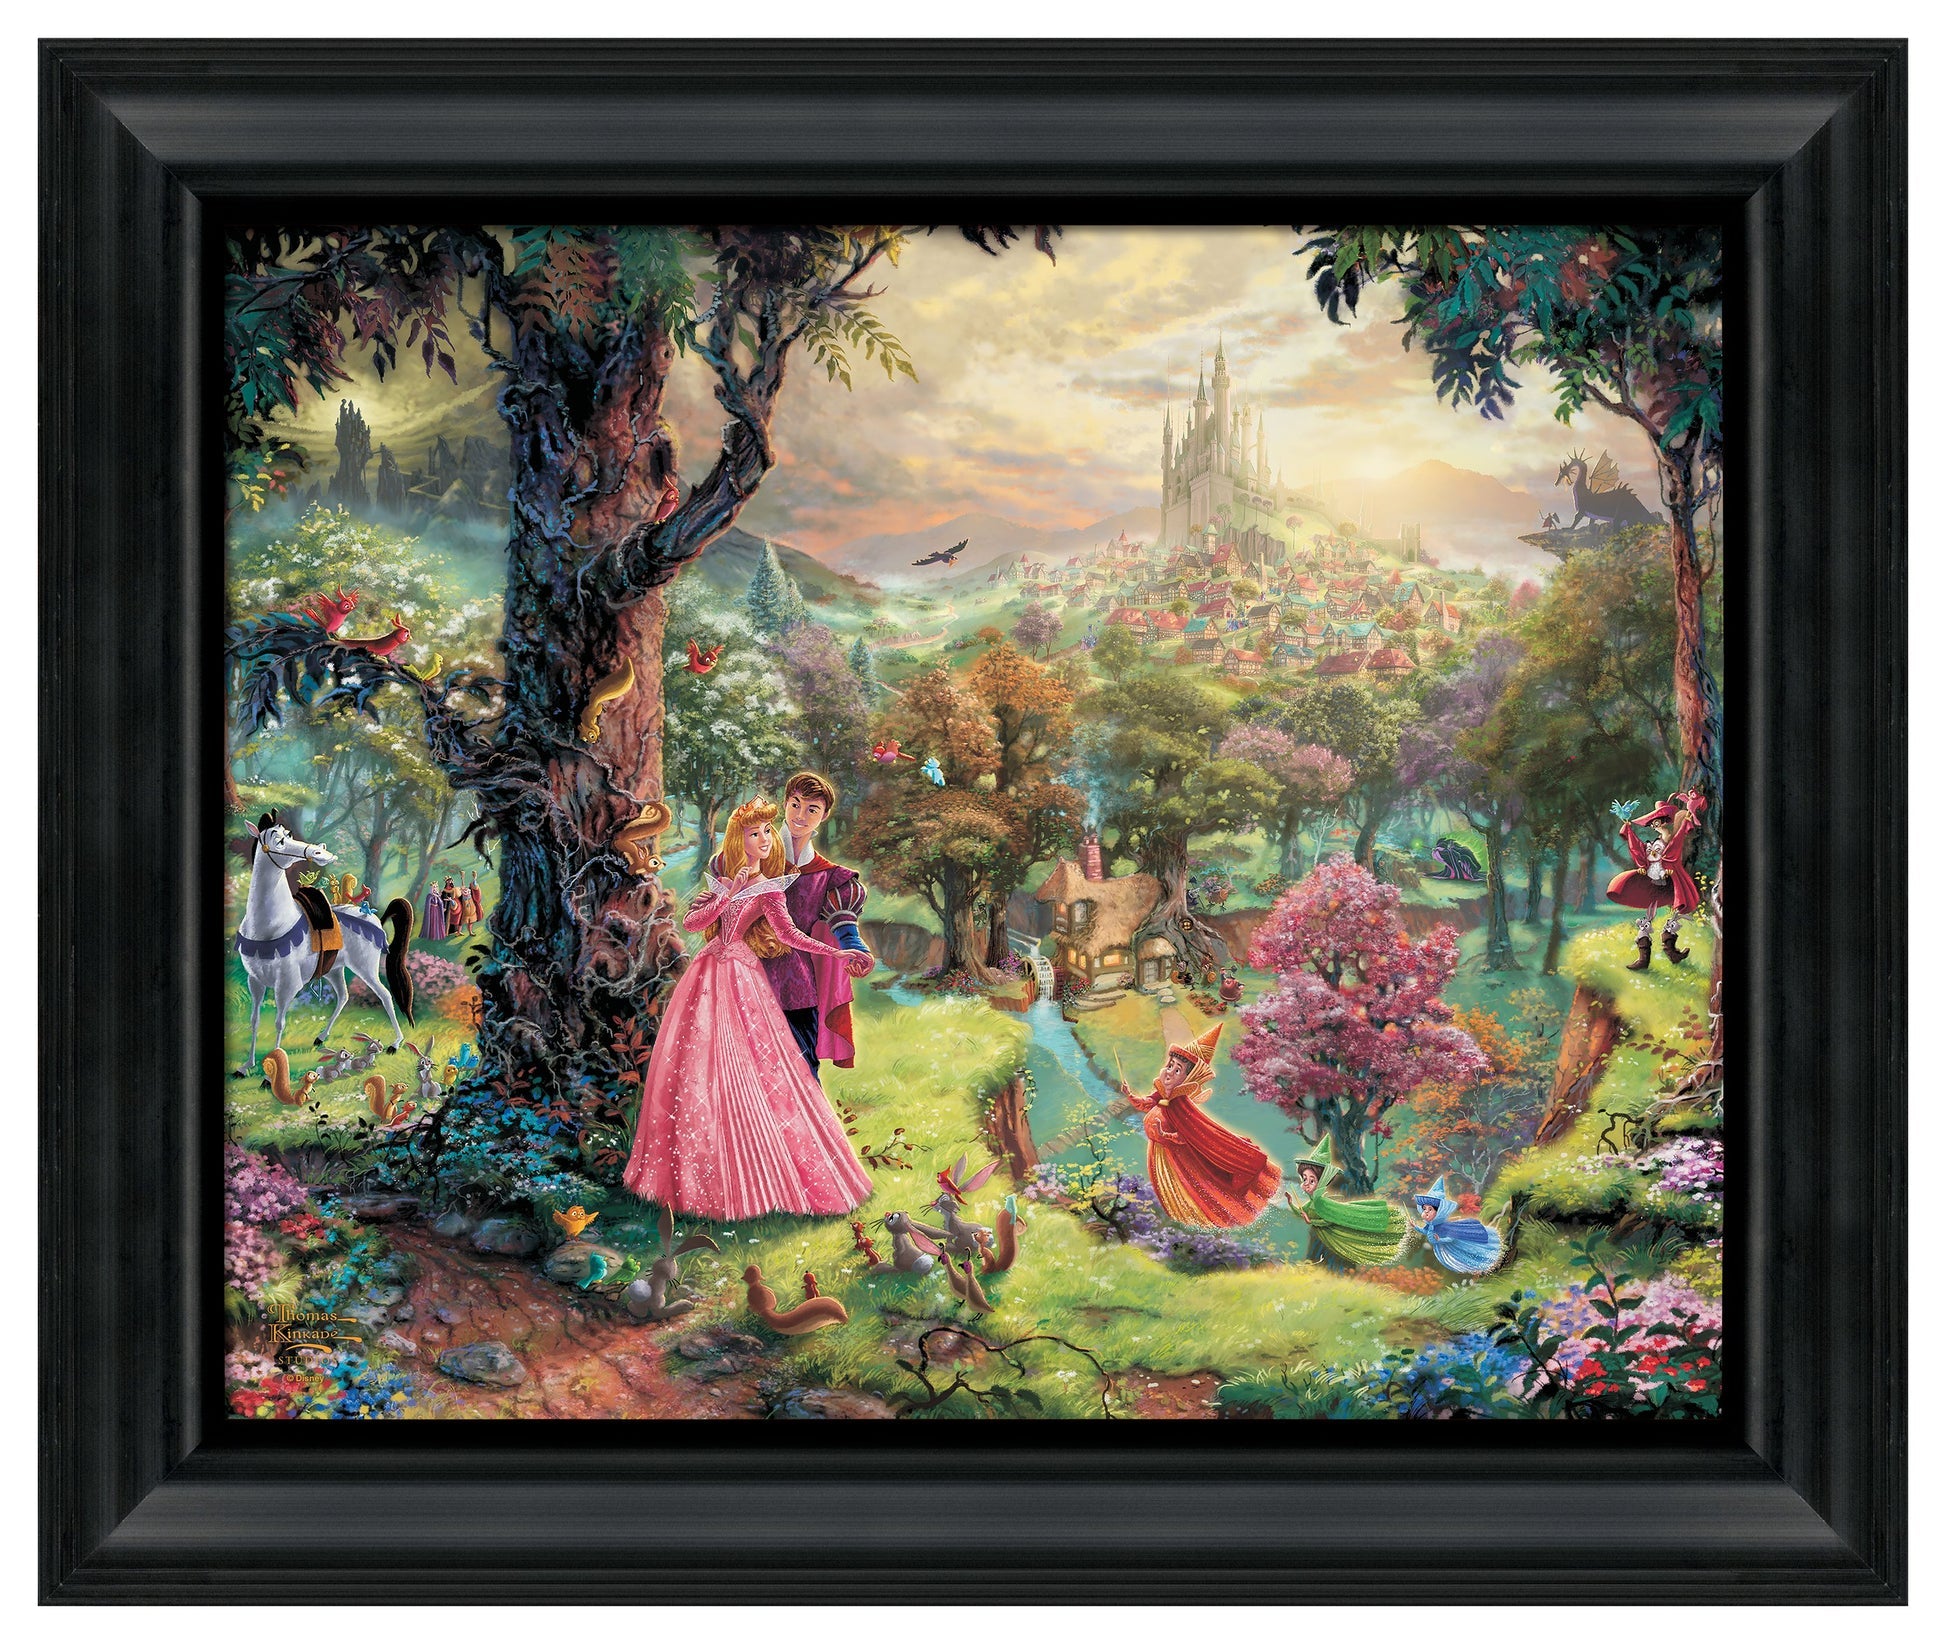 Features Princess Aurora and Prince Phillip together in the mix of all the storyline characters in the background.